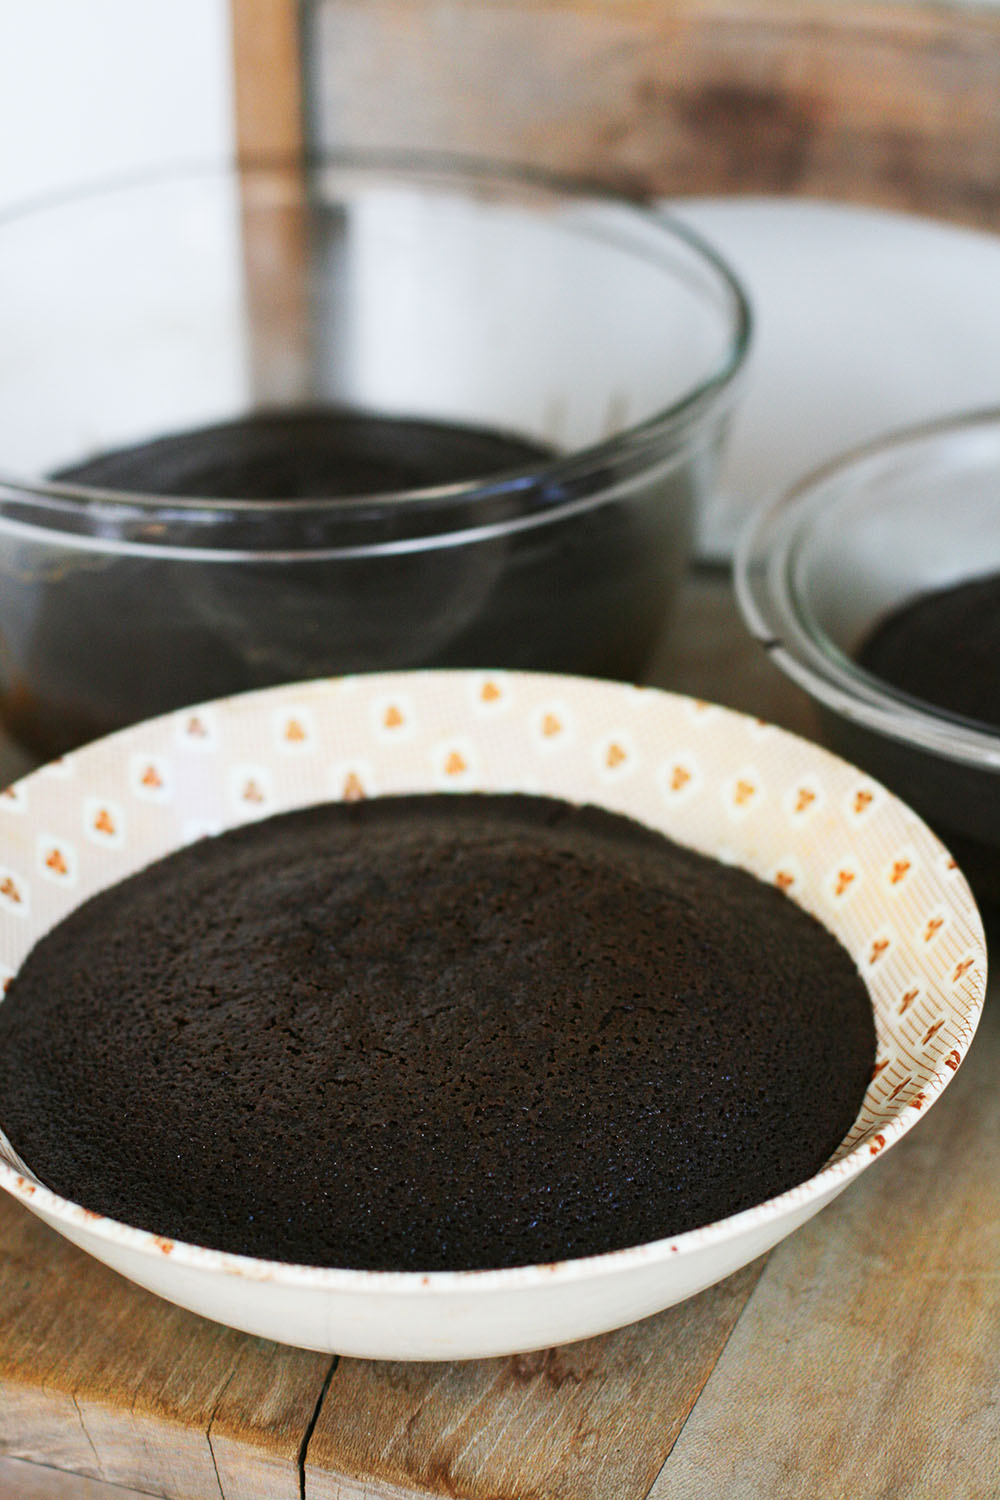 It's easy to make cake in a bowl: Use your favorite cake recipe and bake it in a bowl instead of a pan.